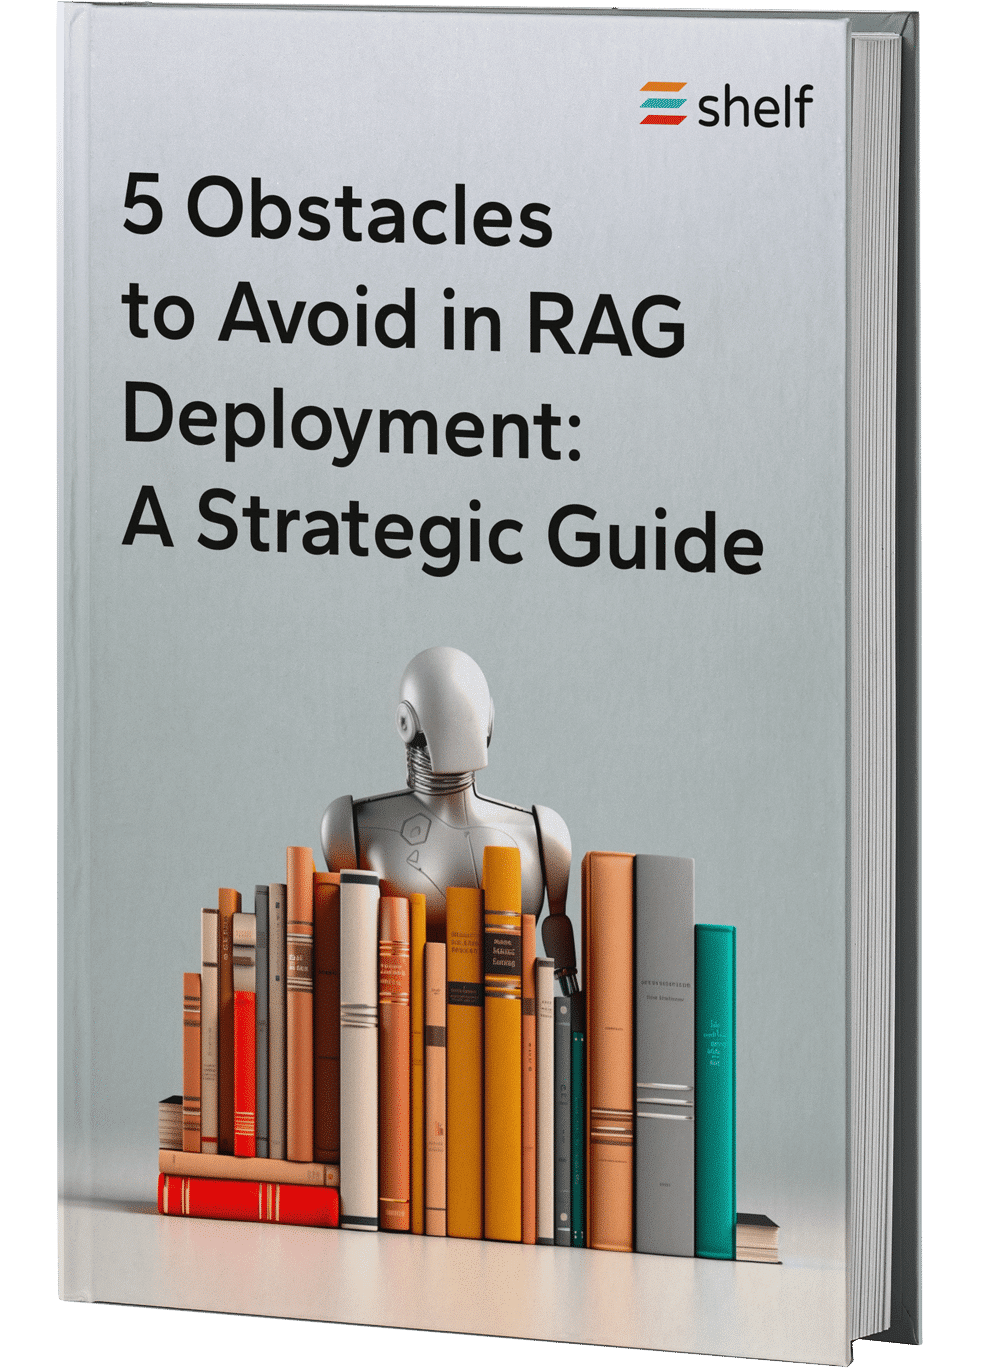 5 Obstacles to Avoid in RAG Deployment: A Strategic Guide: image 1